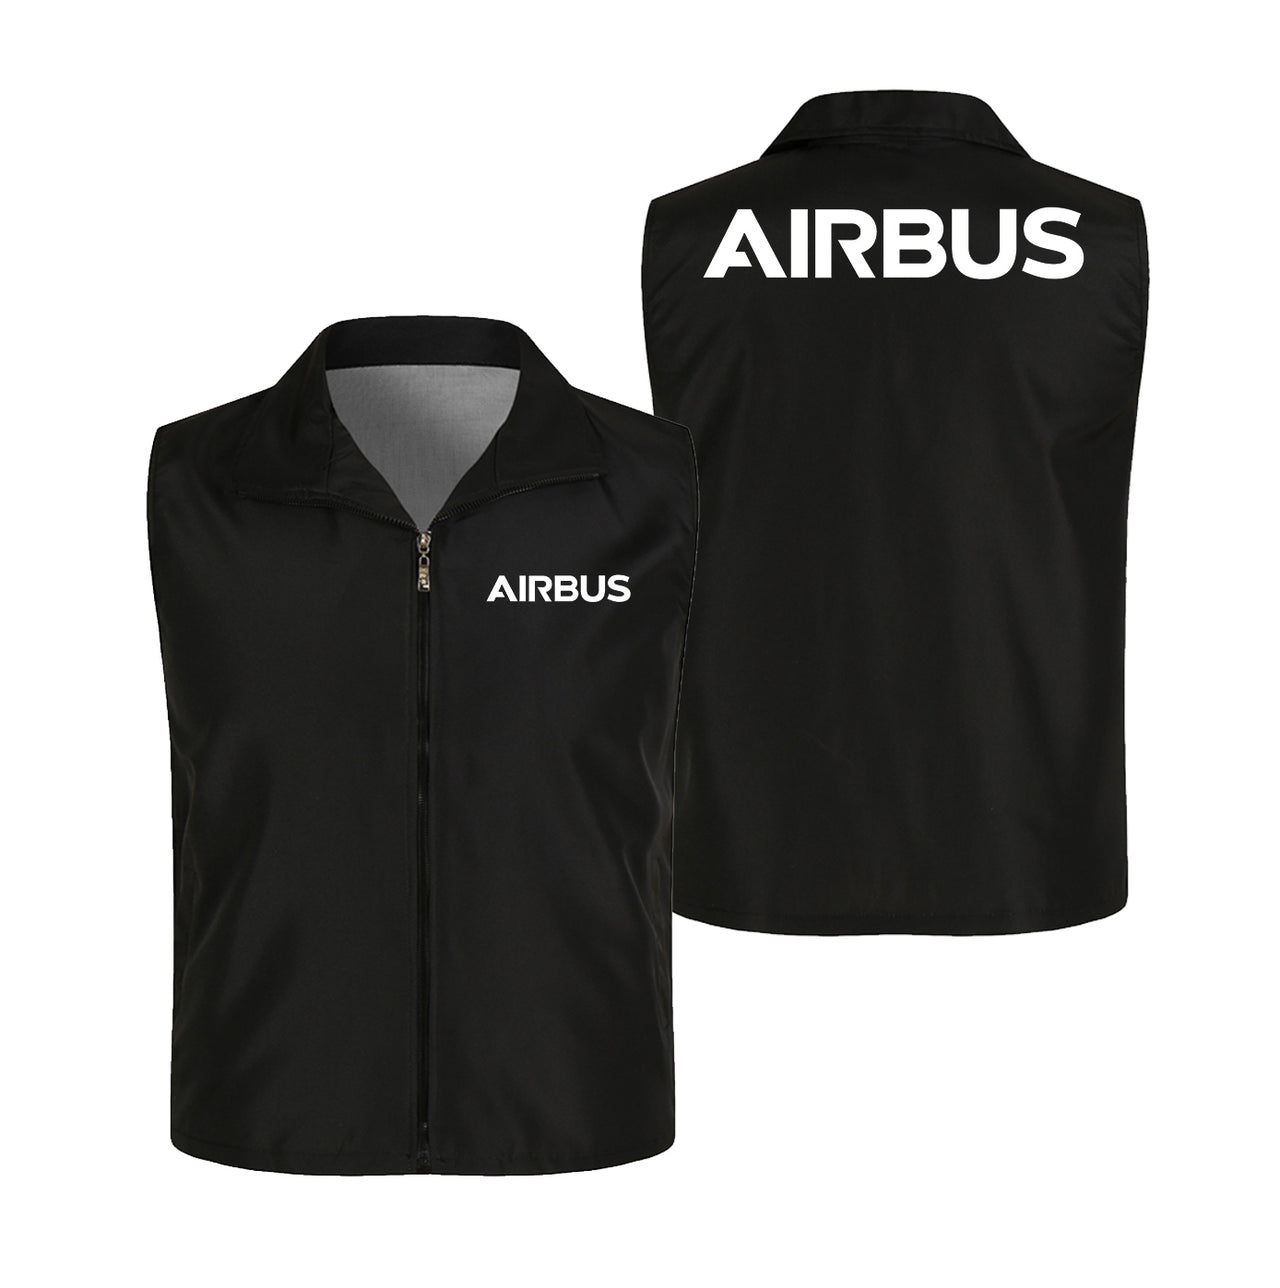 Airbus & Text Designed Thin Style Vests